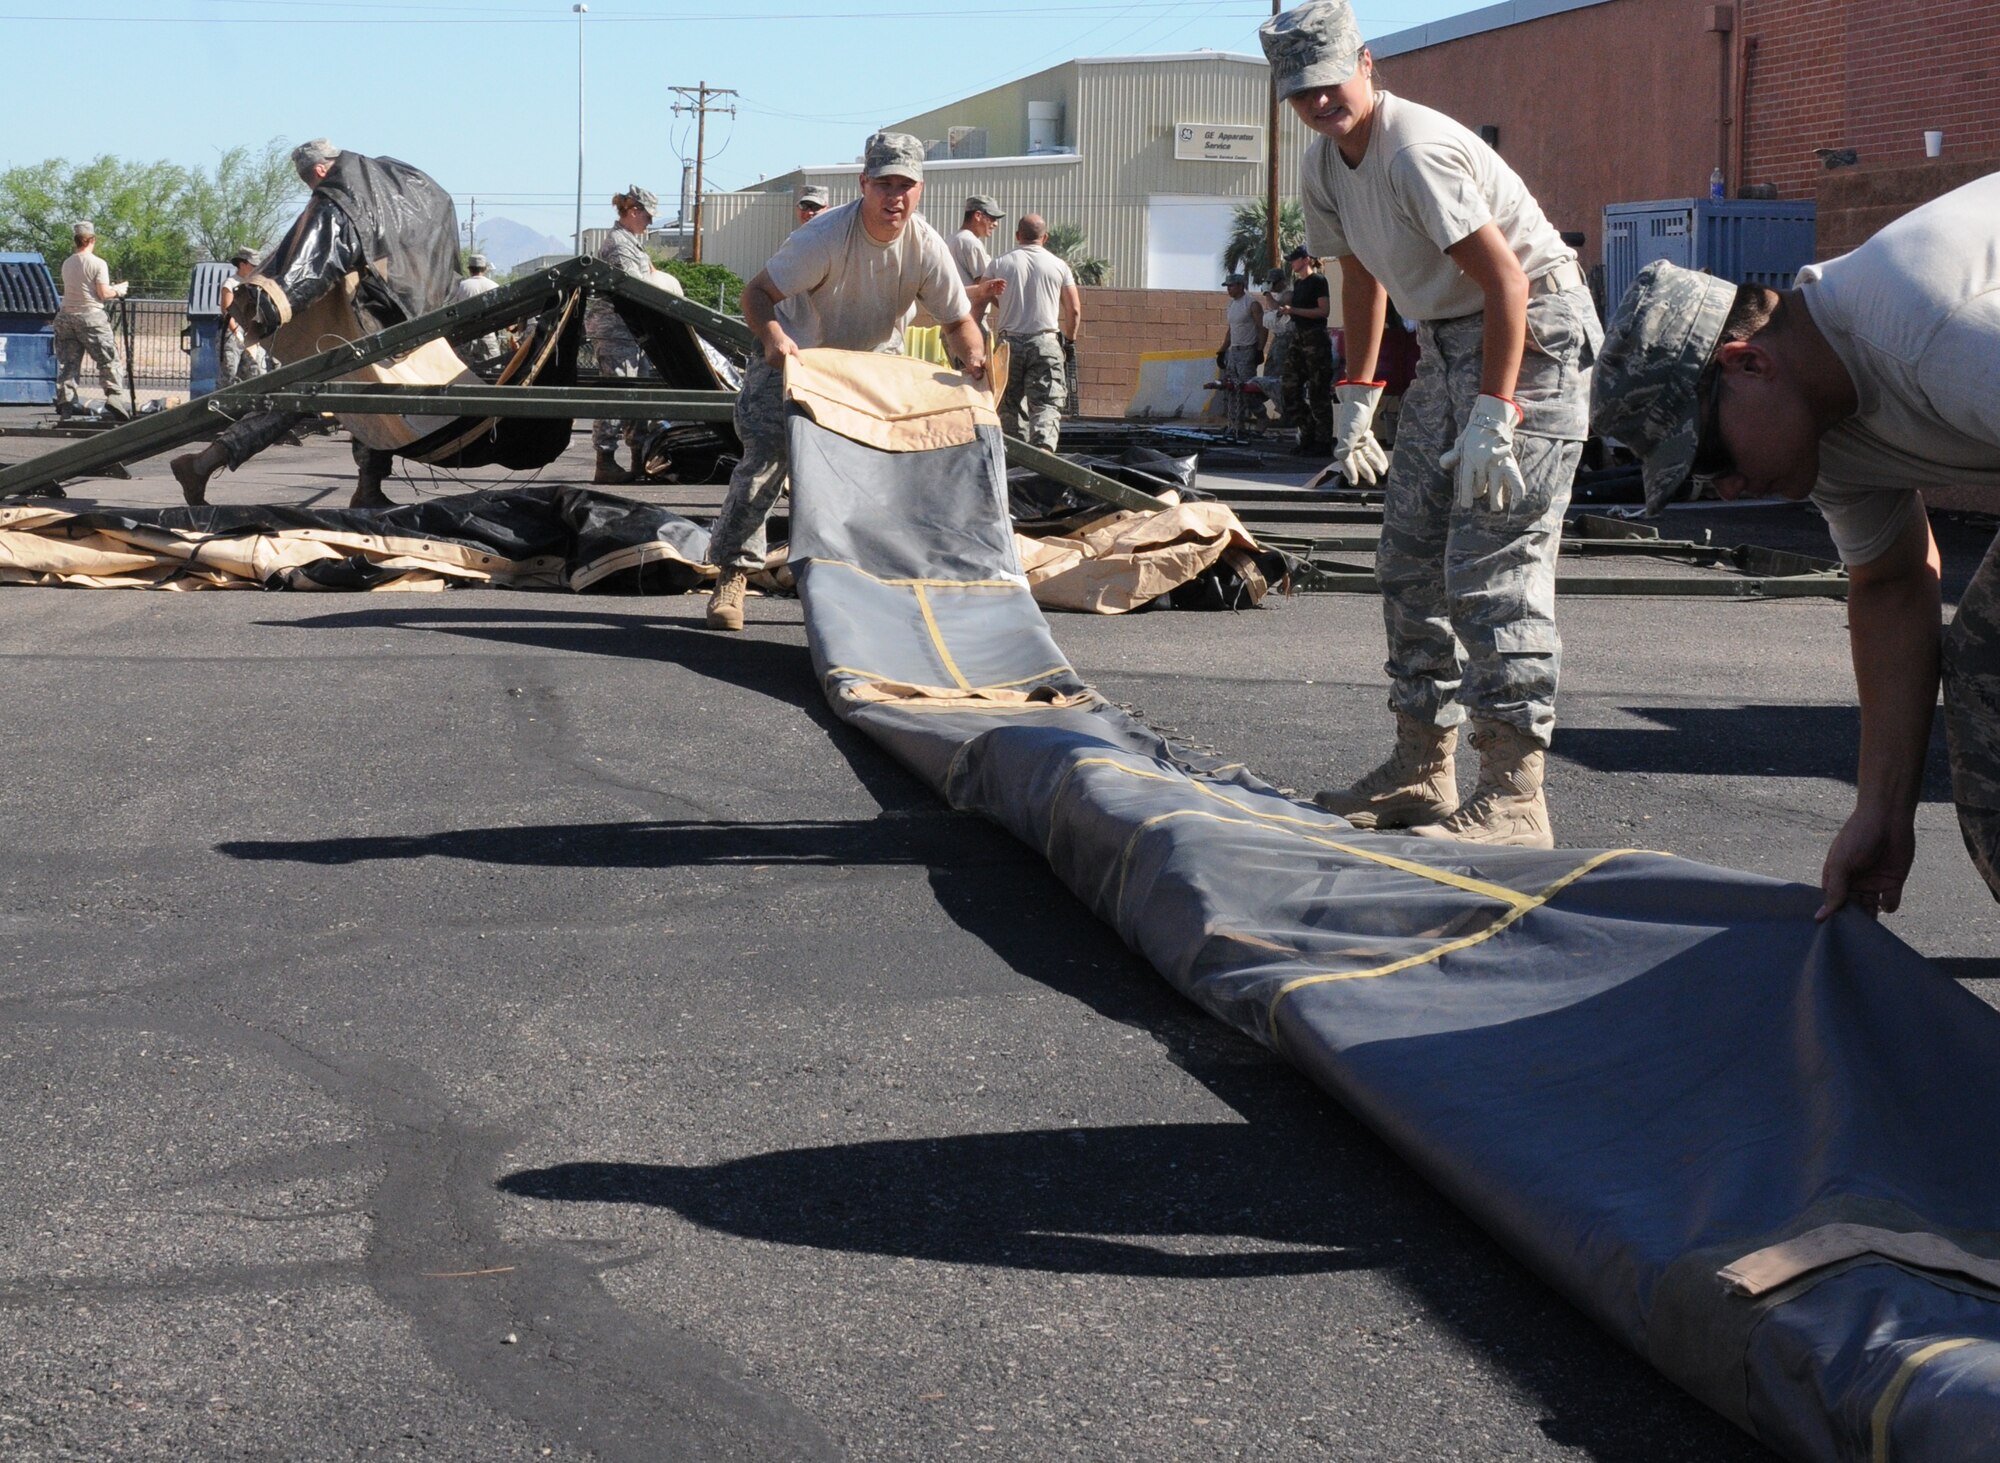 Members of the 162nd Force Support Squadron practice setting up and tearing down small shelter systems and temper tents here Aug. 11 and 13 as part of a week-long event known as home station training. The tents and shelters are used overseas for a variety of purposes when permanent structures are not available. (Air Force photo by Staff Sgt. Jordan Jones)